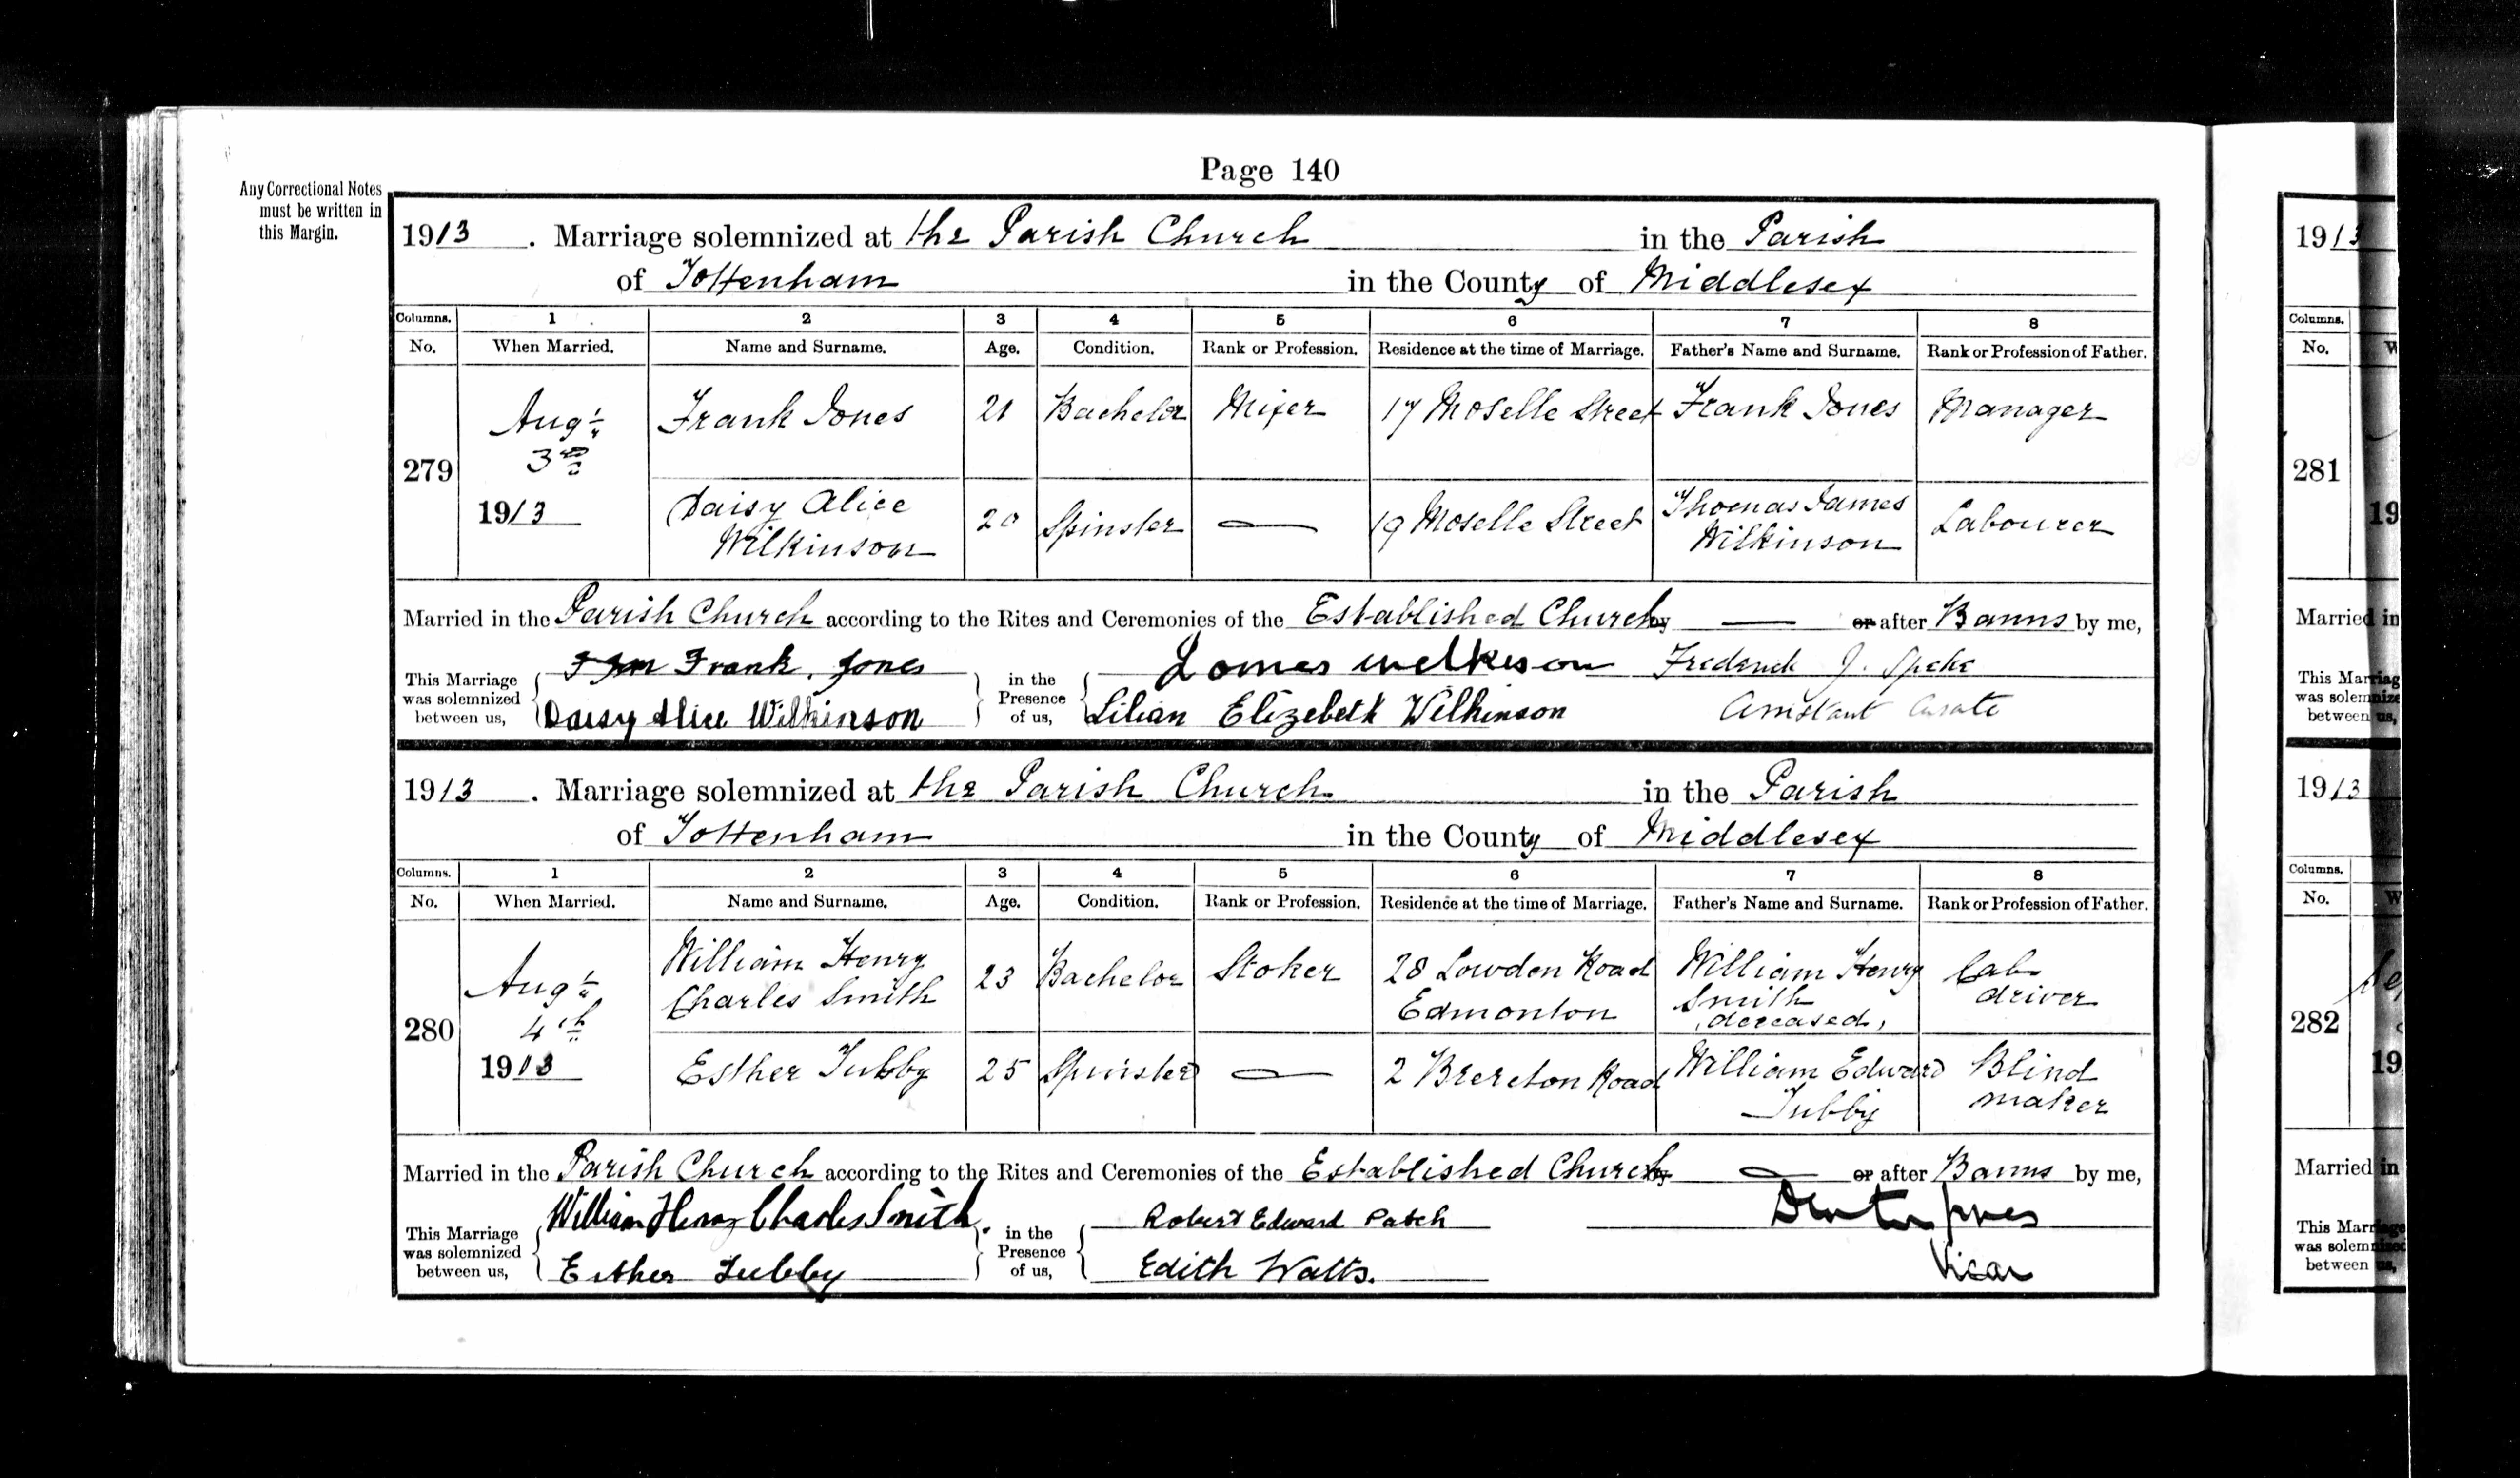 1913 marriage of Esther Tubby to William Henry Charles Smith